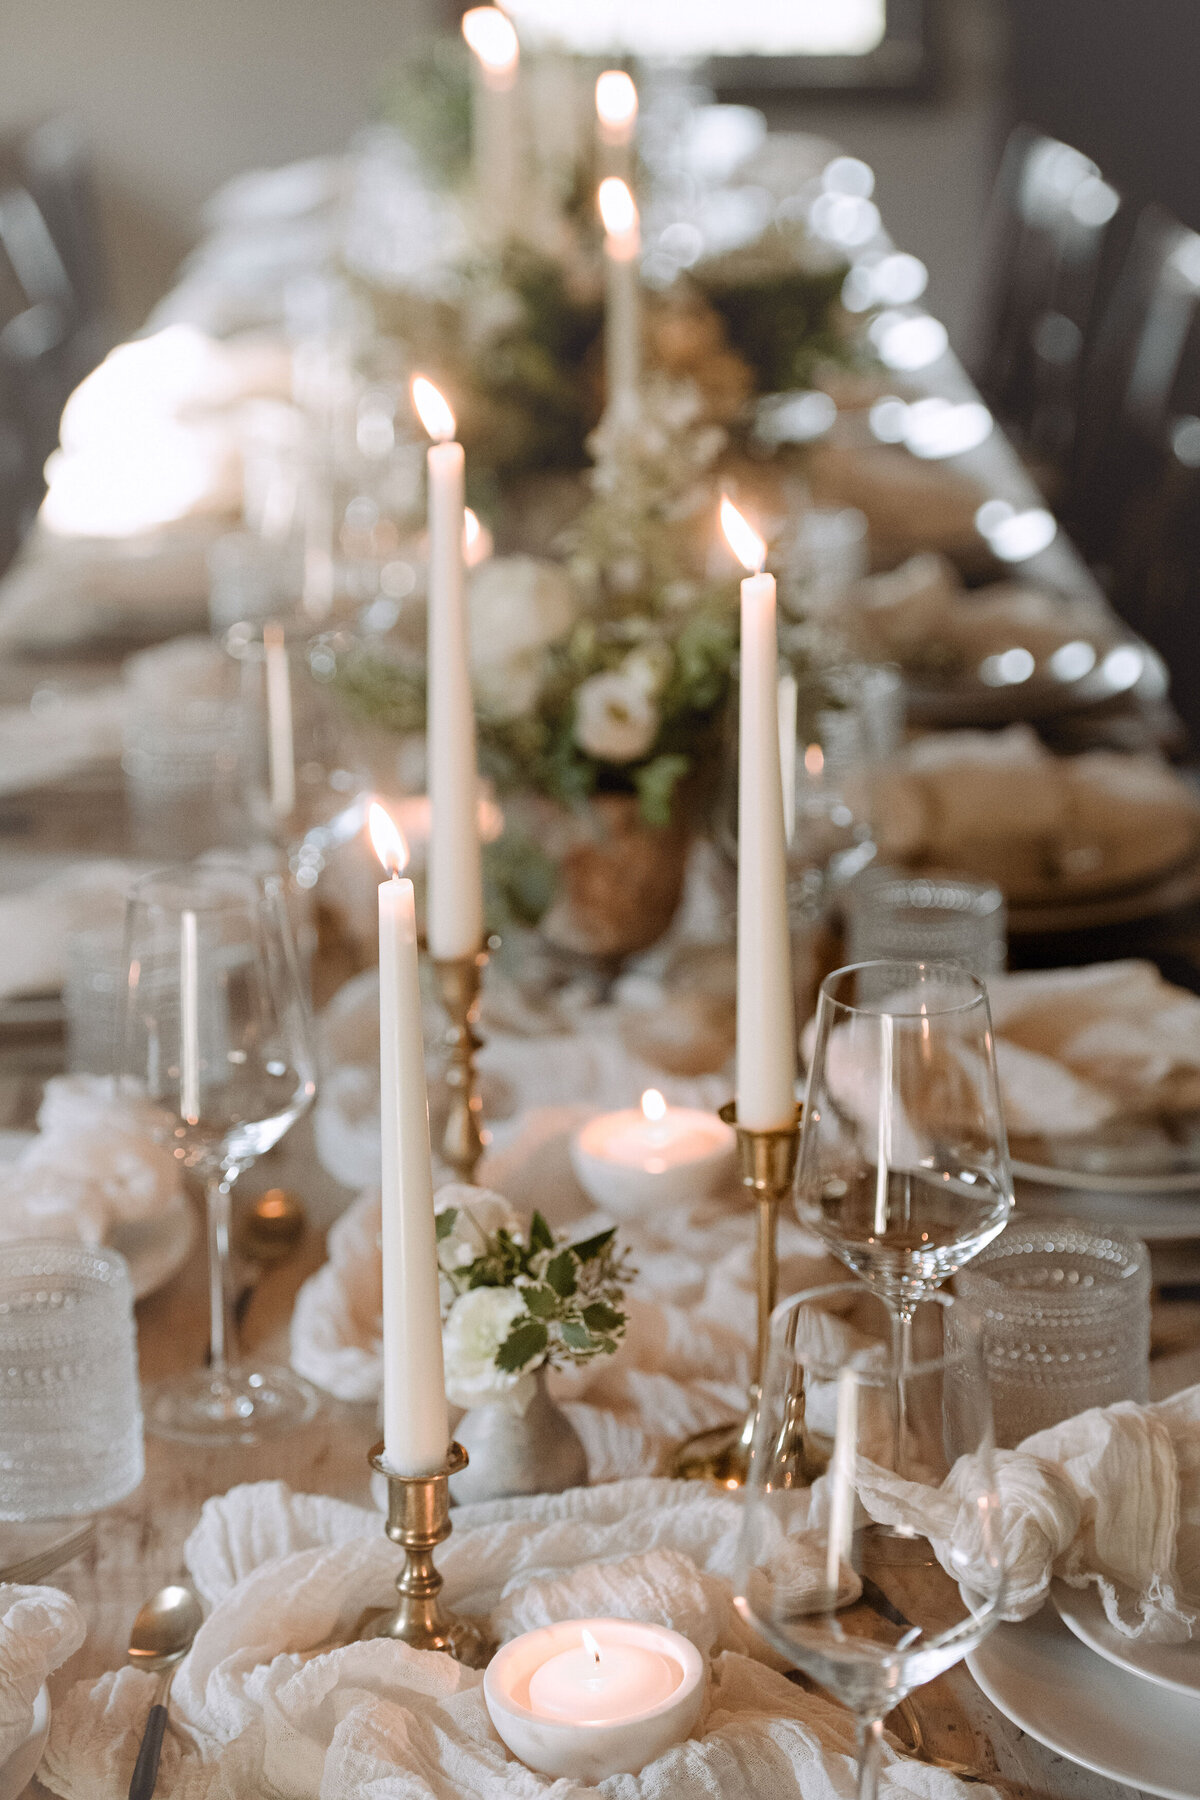 A rustic wedding reception table set with taper candles in brass holders, a gauzy table runner, and ivory linens and china